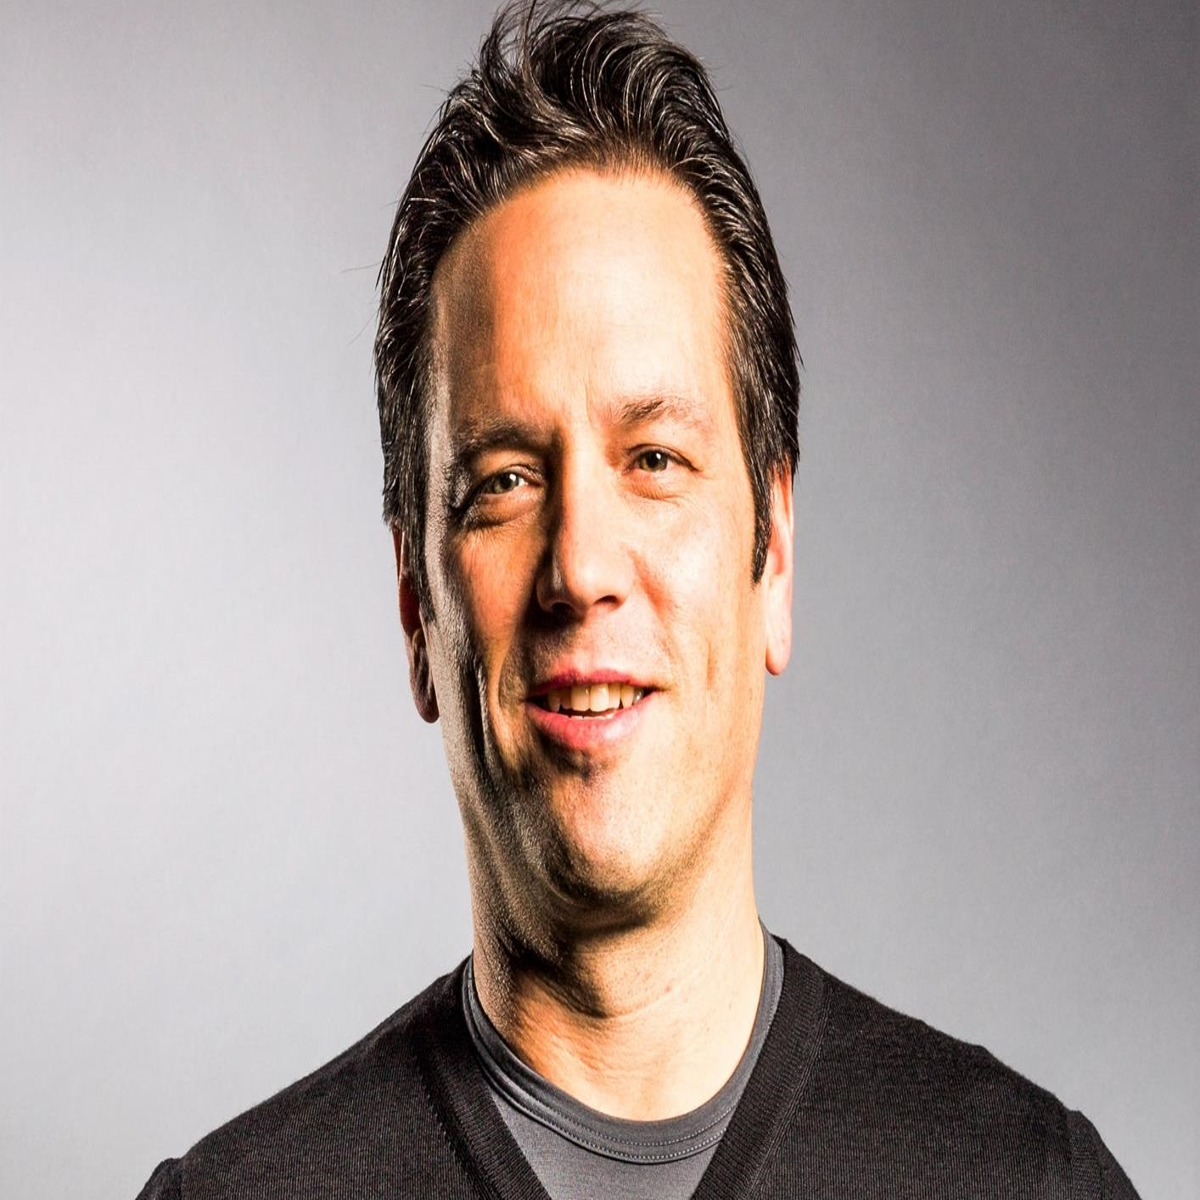 Microsoft gaming chief Phil Spencer cites 'huge demand' for Starfield